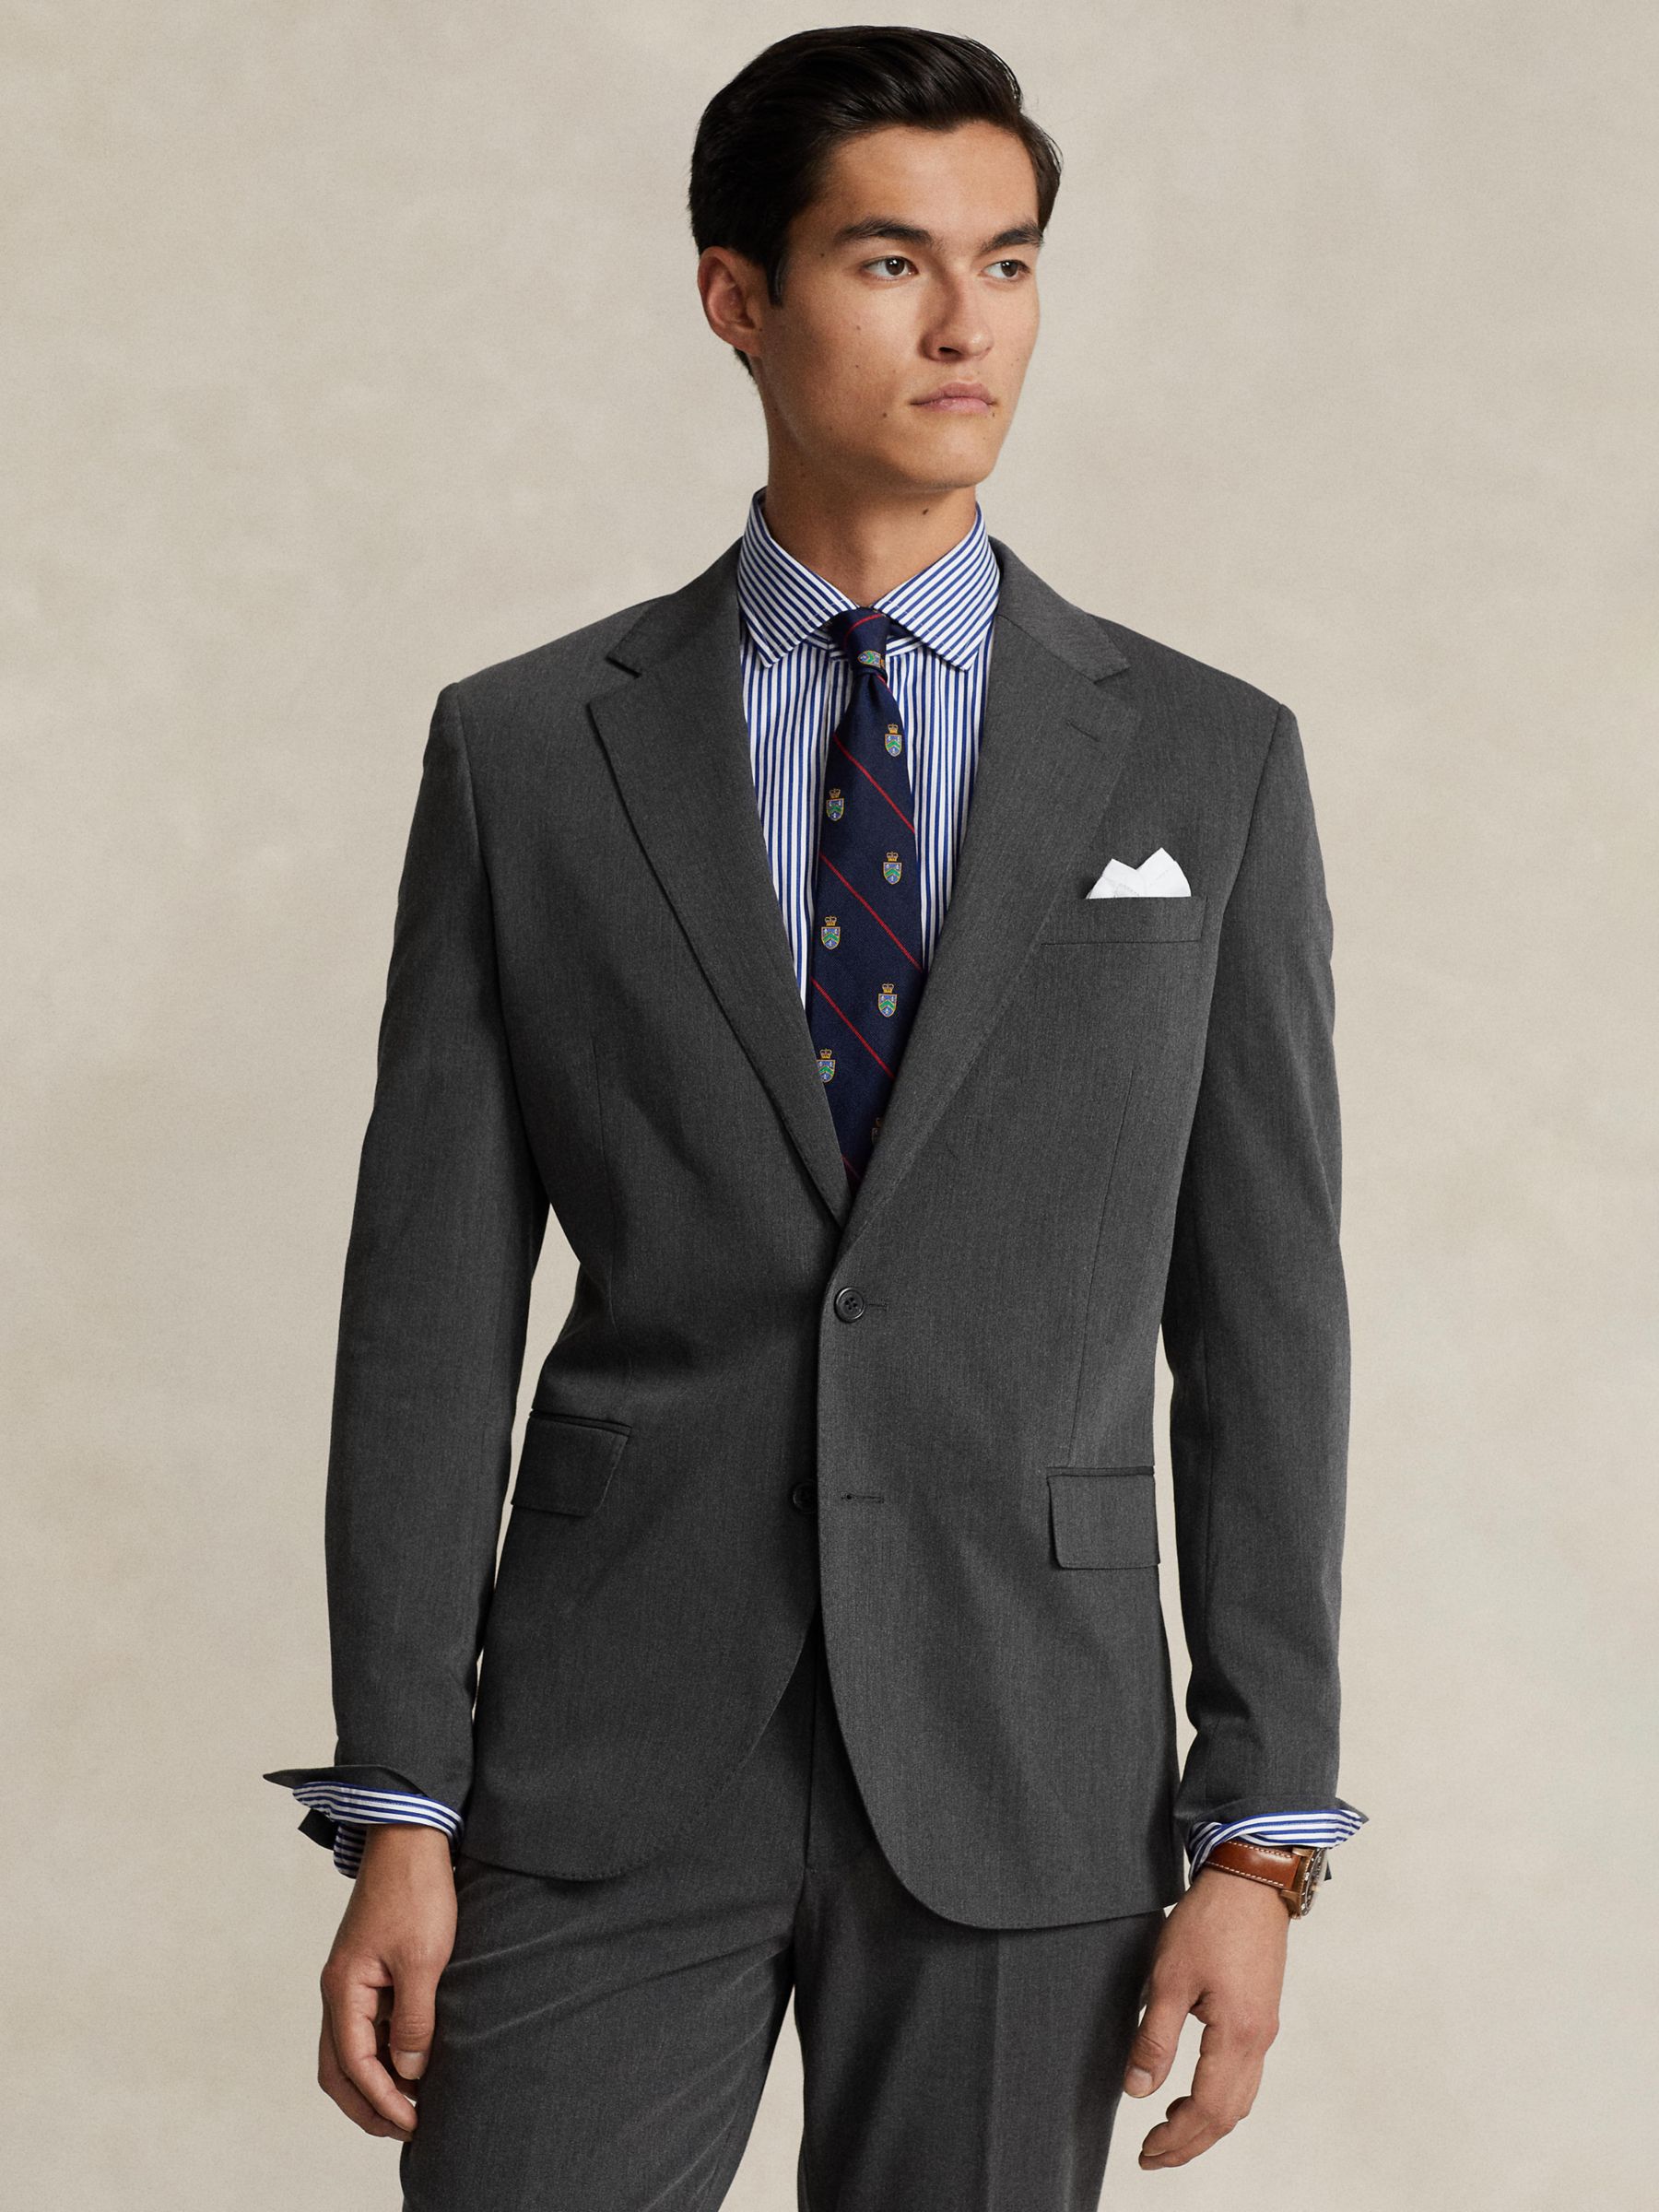 Polo Ralph Lauren Modern Tailored Fit Suit Jacket, Charcoal at John ...